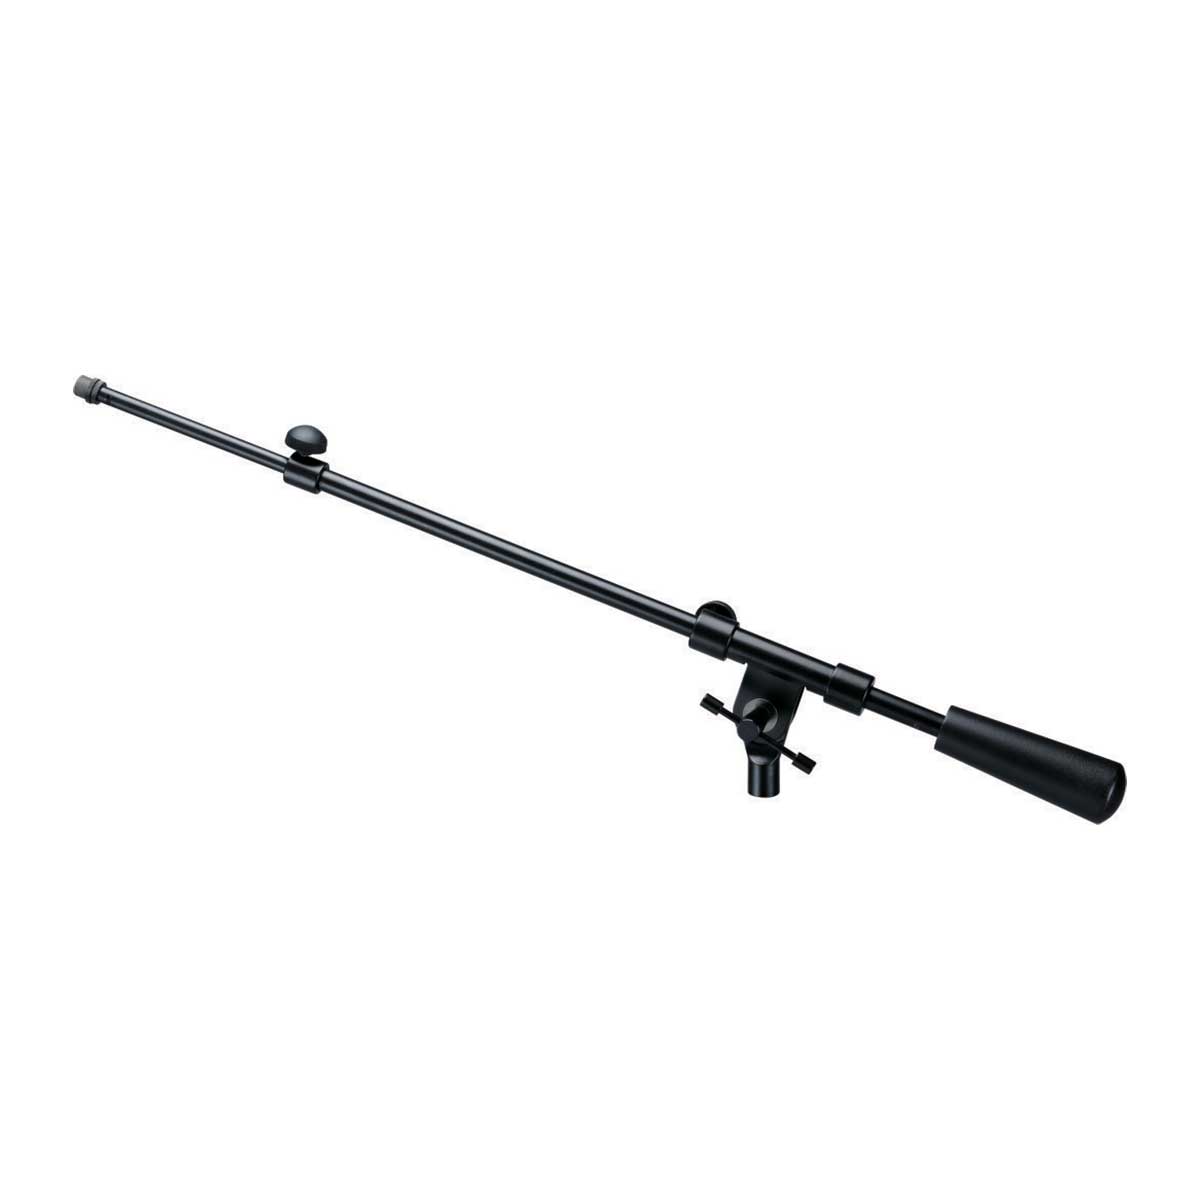 Precision by Triad-Orbit Telescoping boom arm with approximately 1kg counterweight